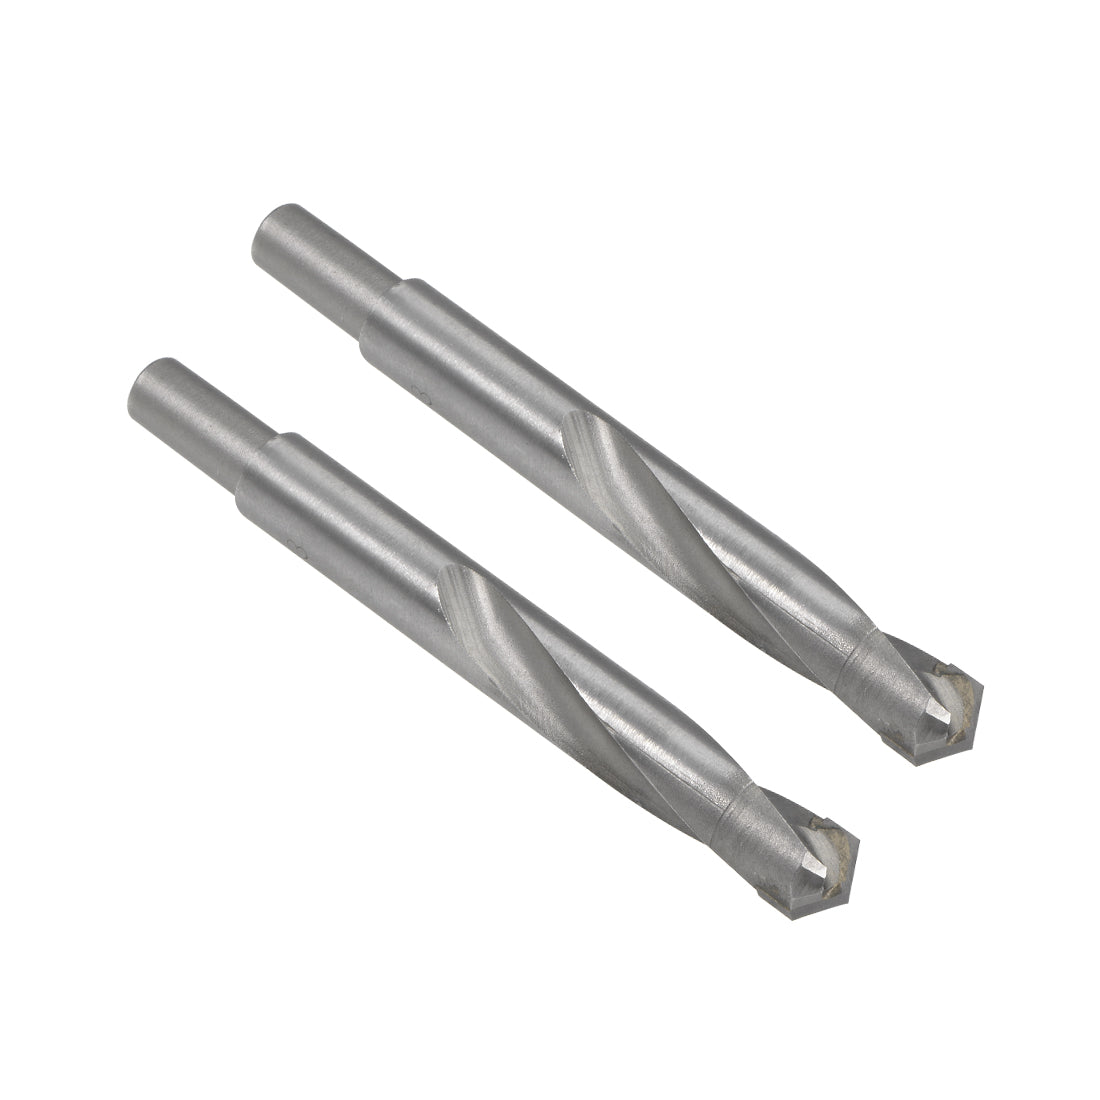 uxcell Uxcell 13mm Cemented Carbide Twist Drill Bits for Stainless Steel Copper Aluminum 2 Pcs